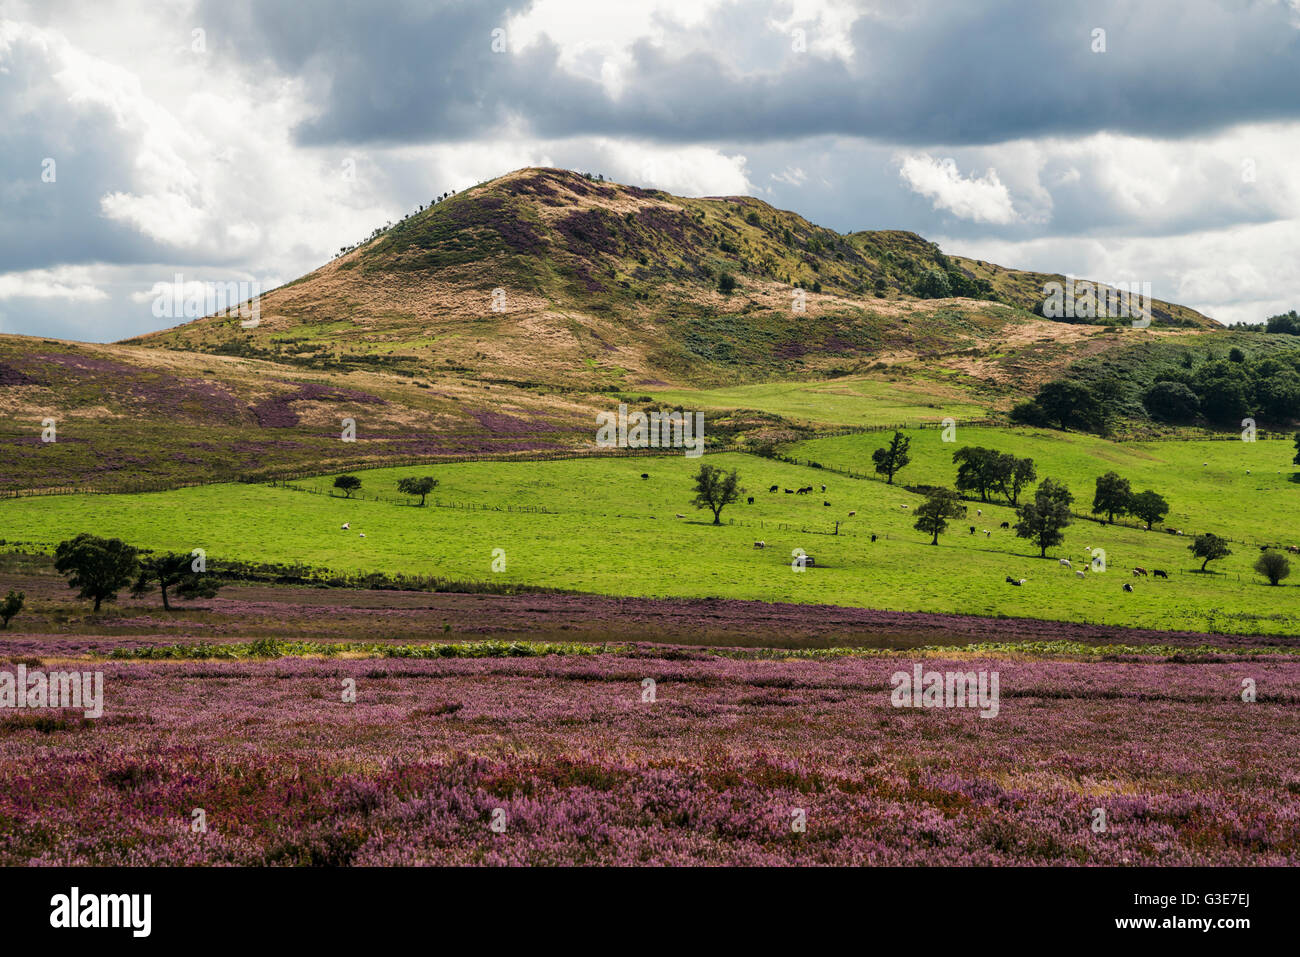 Lush grass fields and a hill under a cloudy sky and blossoming pink flowers in the foreground; Yorkshire, England Stock Photo